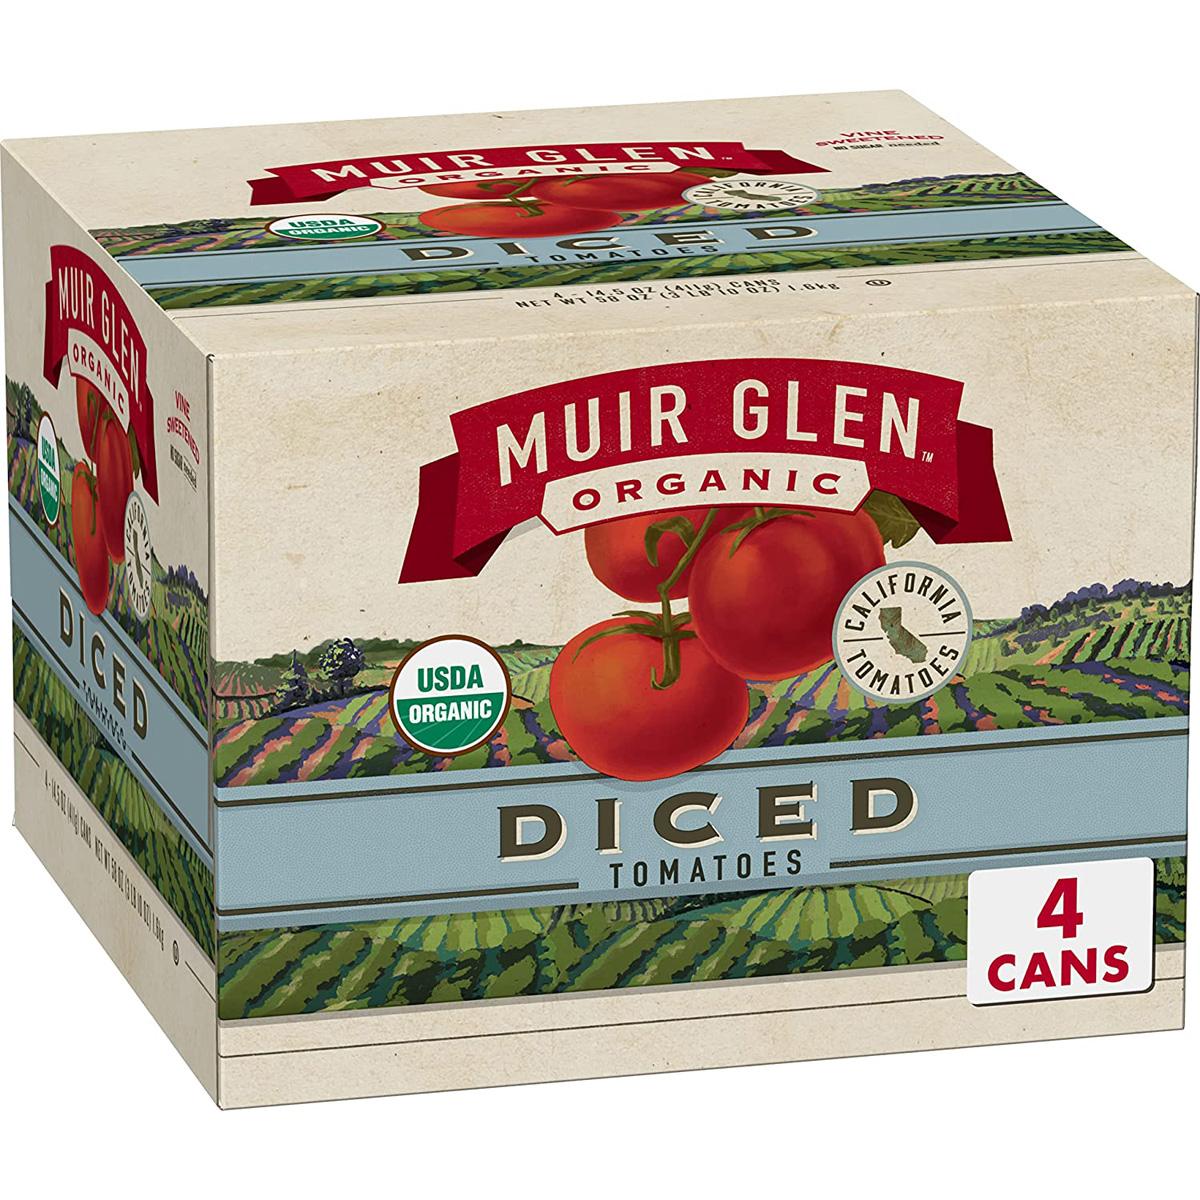 Muir Glen Organic Canned Diced Tomatoes 4 Pack for $3.65 Shipped